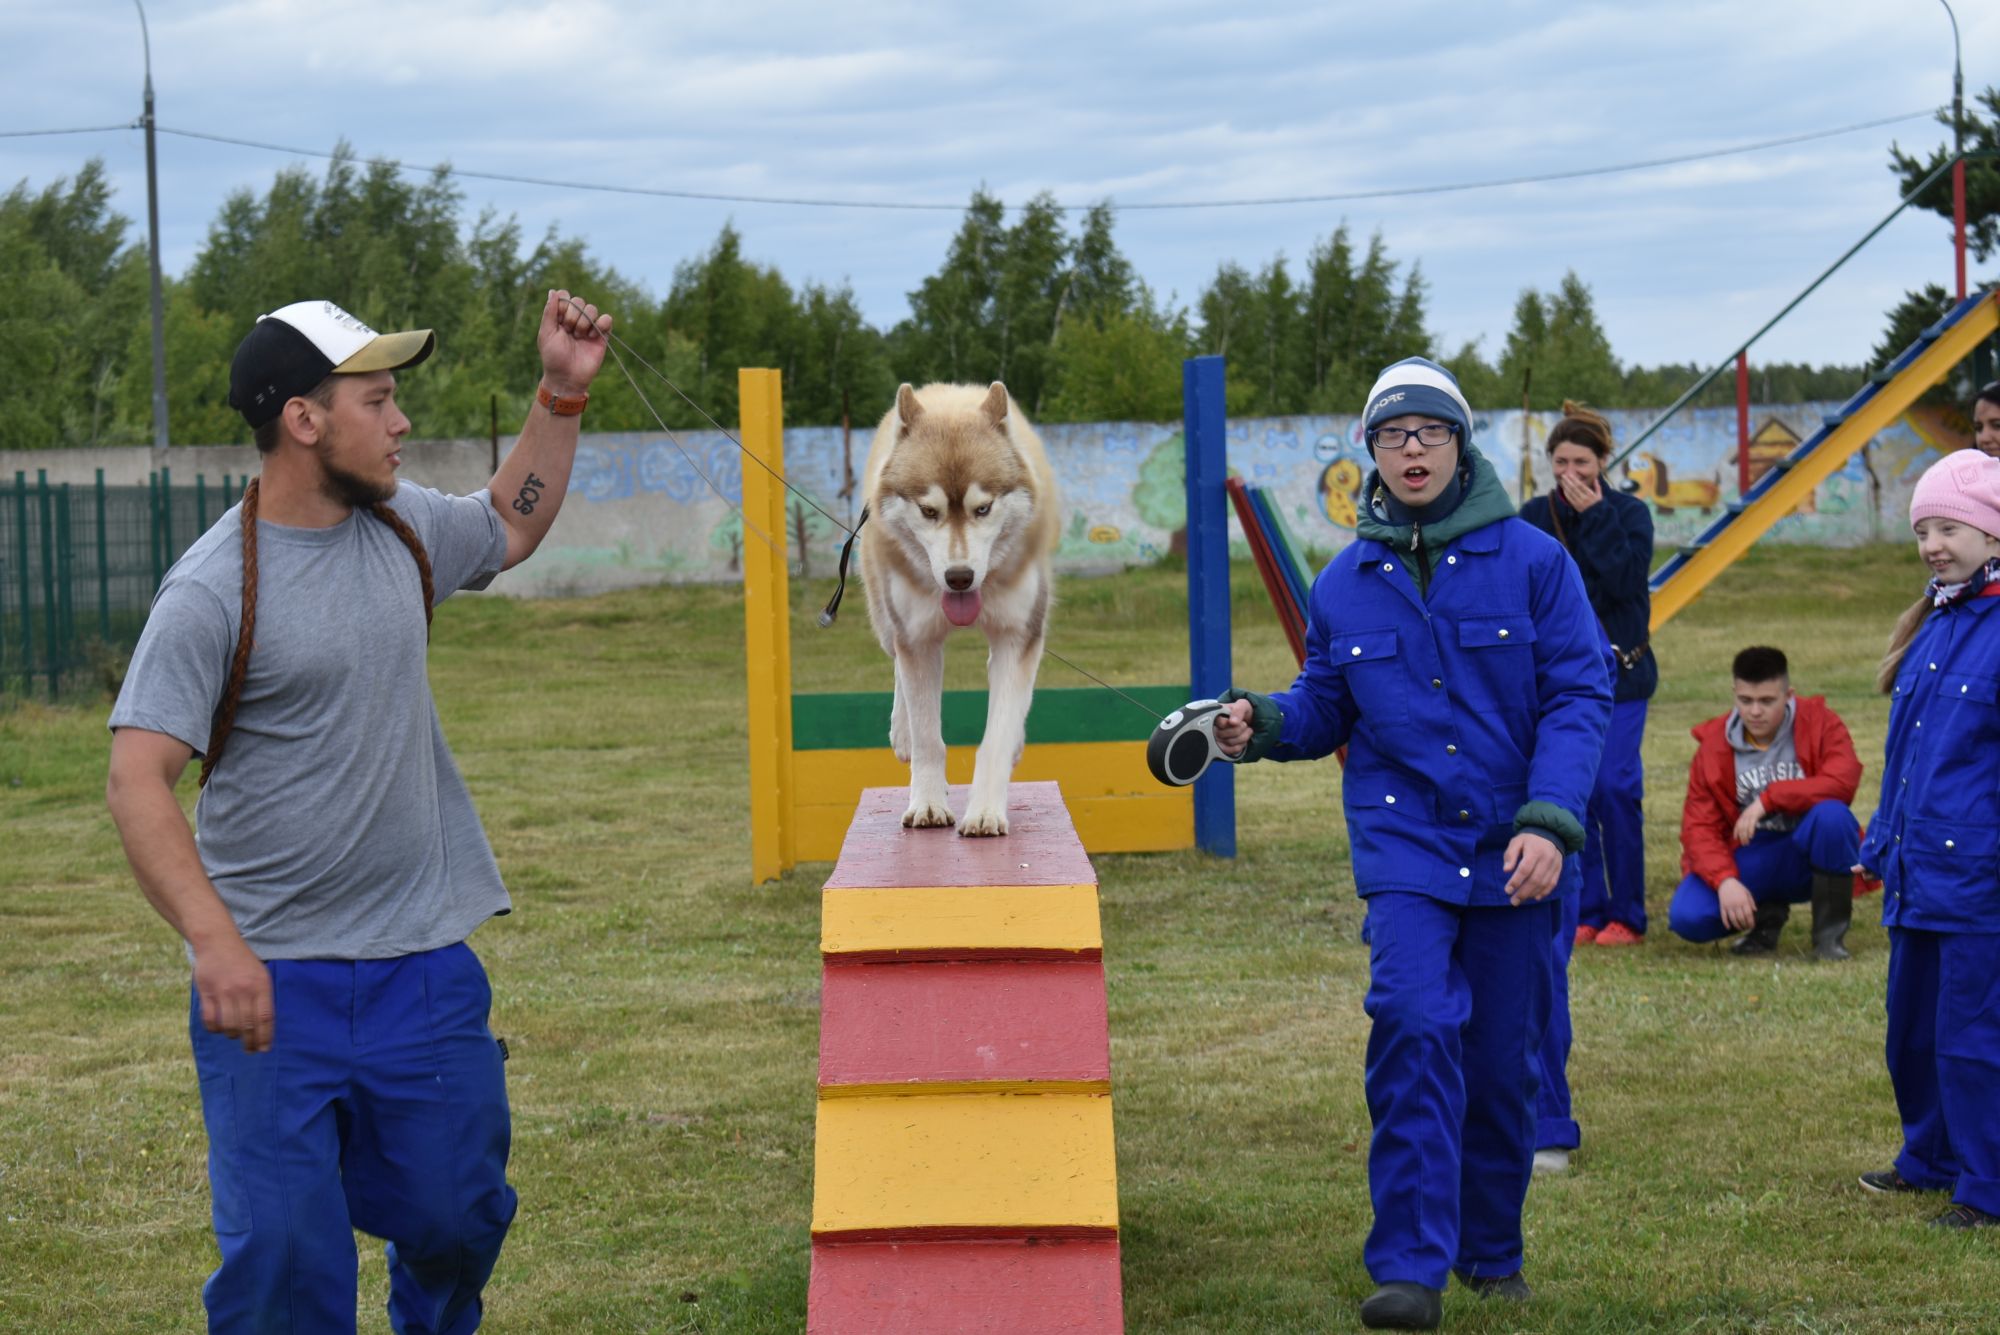 Teenagers With Down Syndrome Learn To Care For Animals Downside Up Ltd